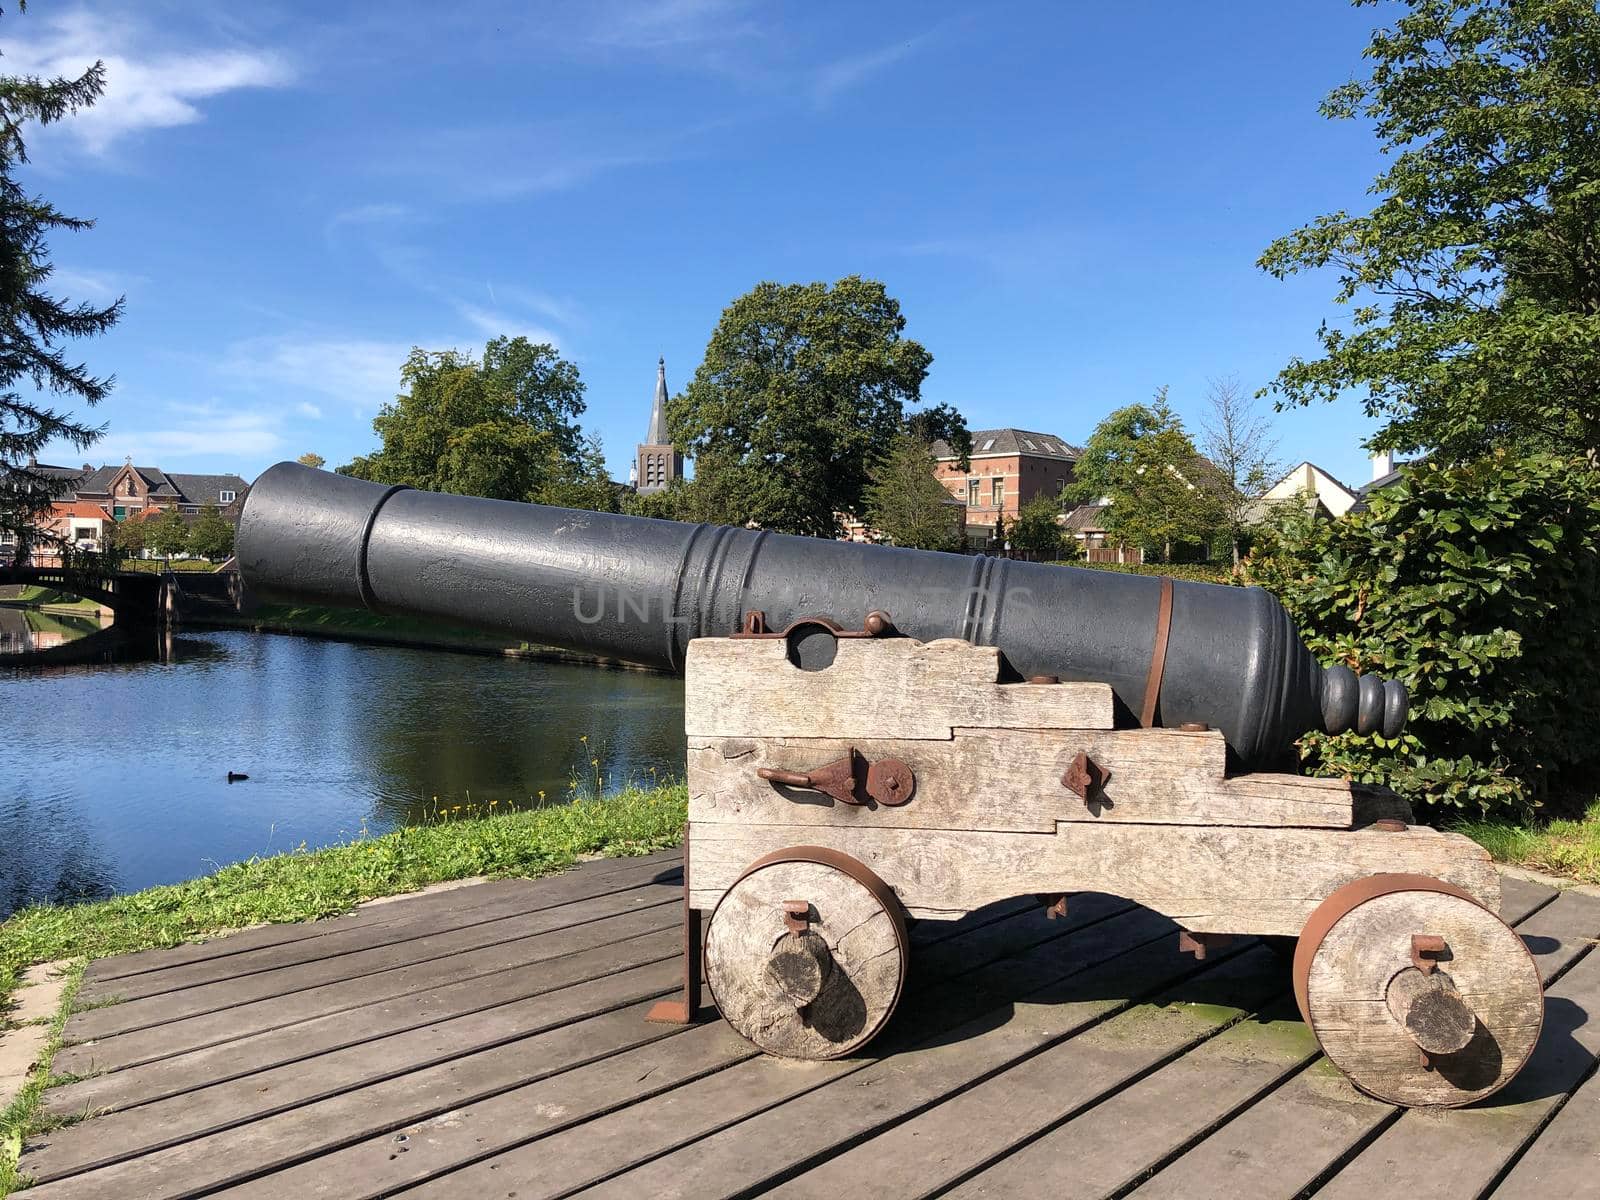 Cannon in Groenlo, The Netherlands